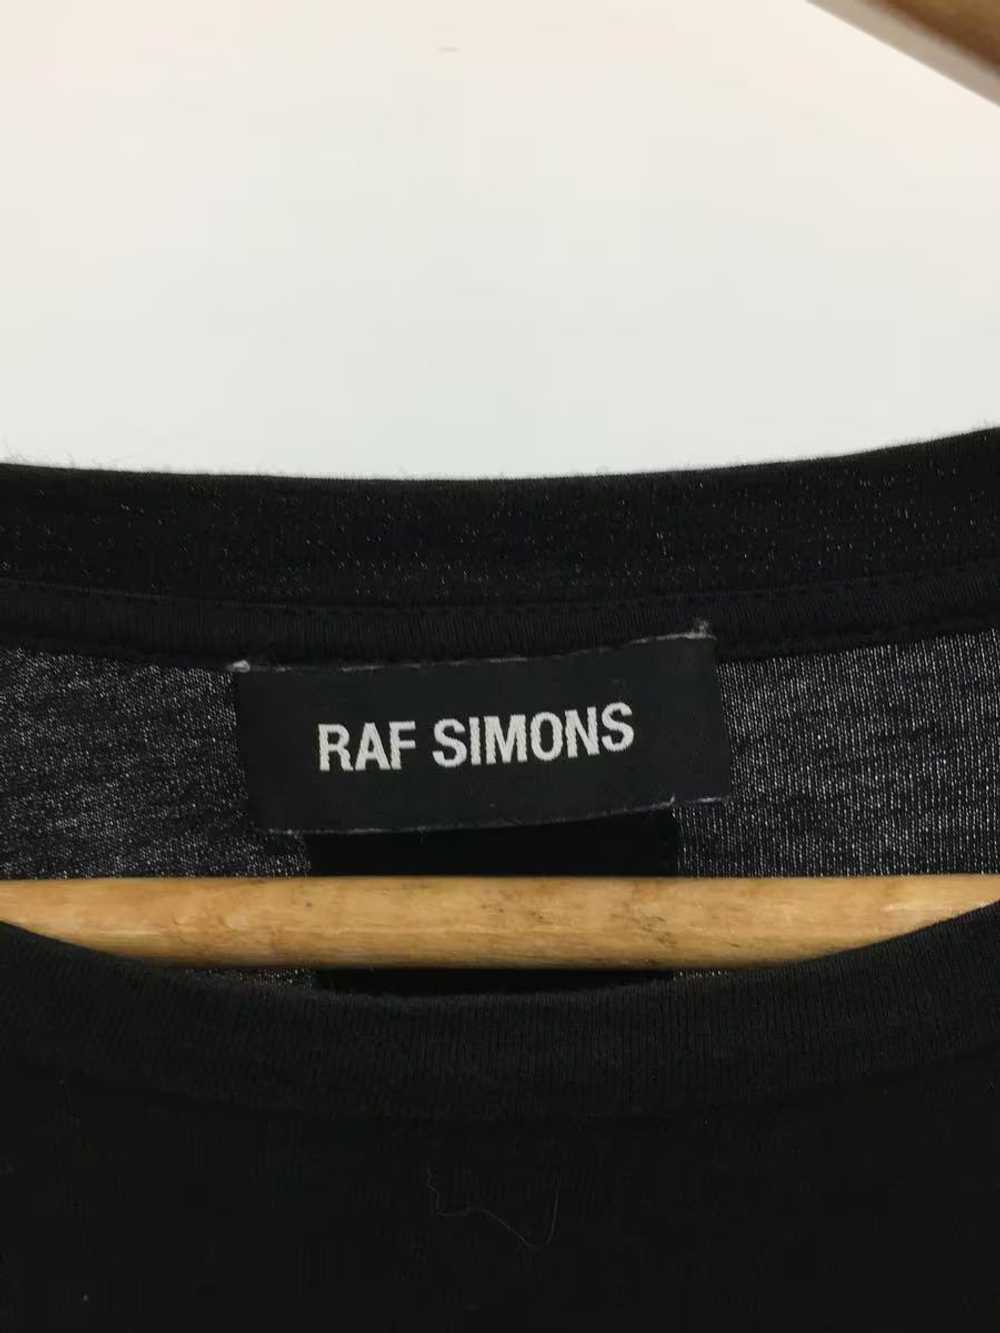 Raf Simons "TO THE ARCHIVES" Tee - image 3